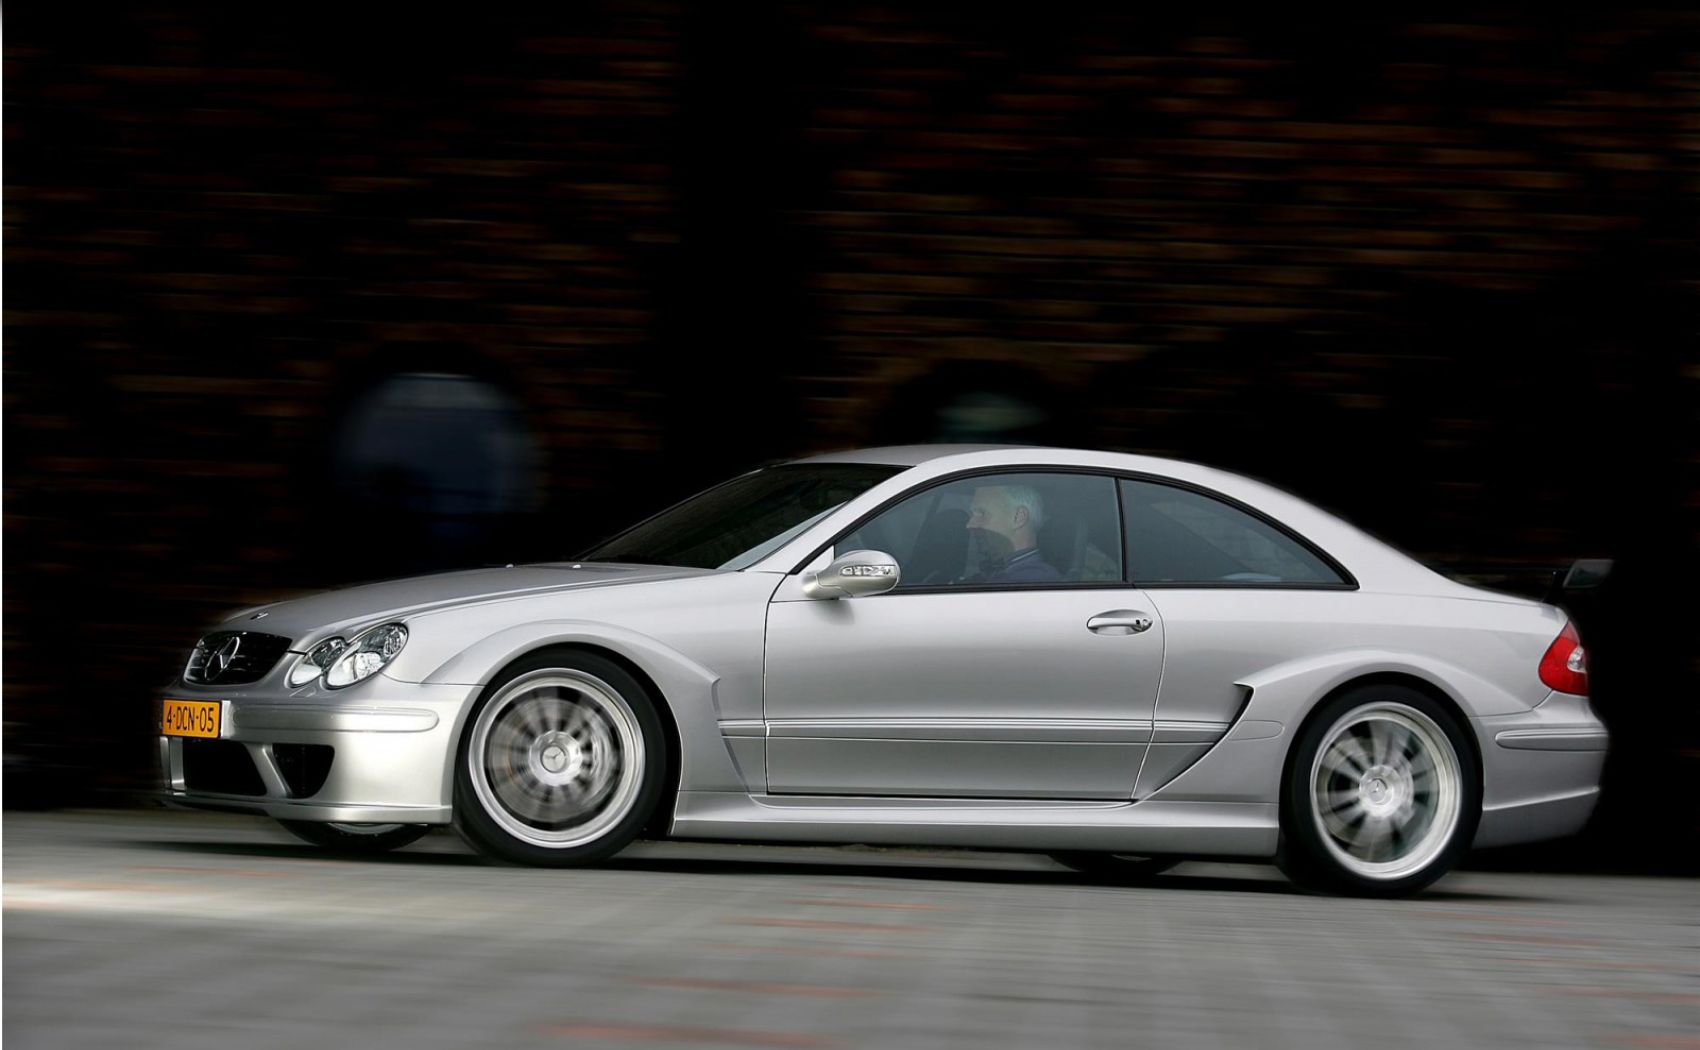 17 Years After Its Debut, the Mercedes CLK DTM AMG Is Still an Epic ...